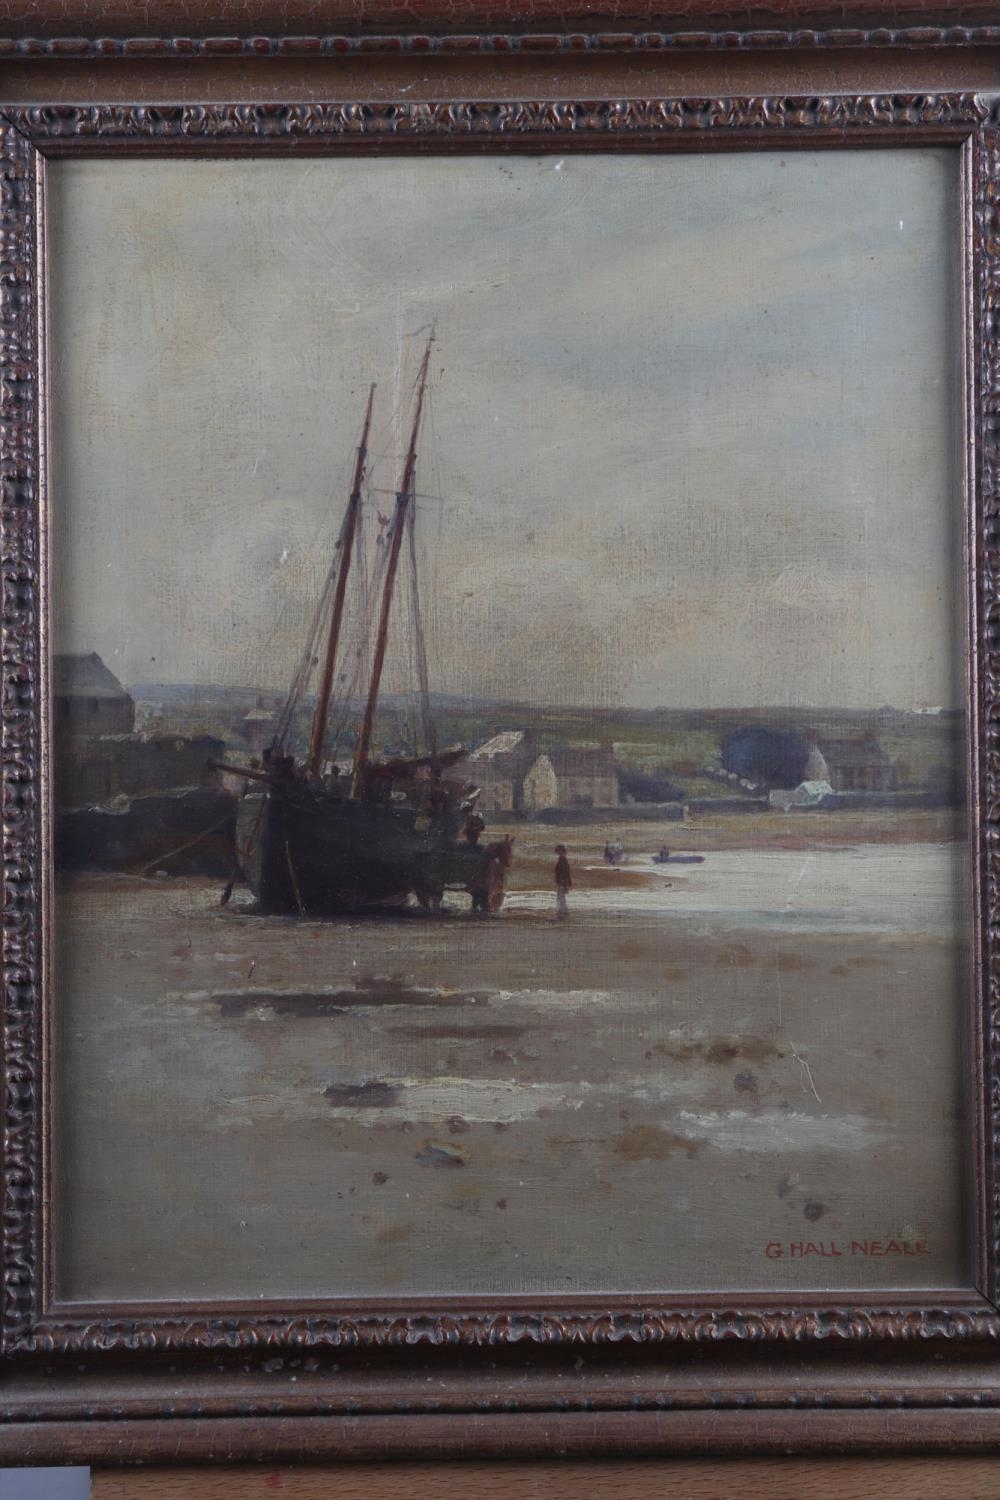 G Hall Neale: oil on board, coastal scene with fishing boat at low tide, 15 1/2" x 12 1/2", in - Image 2 of 5